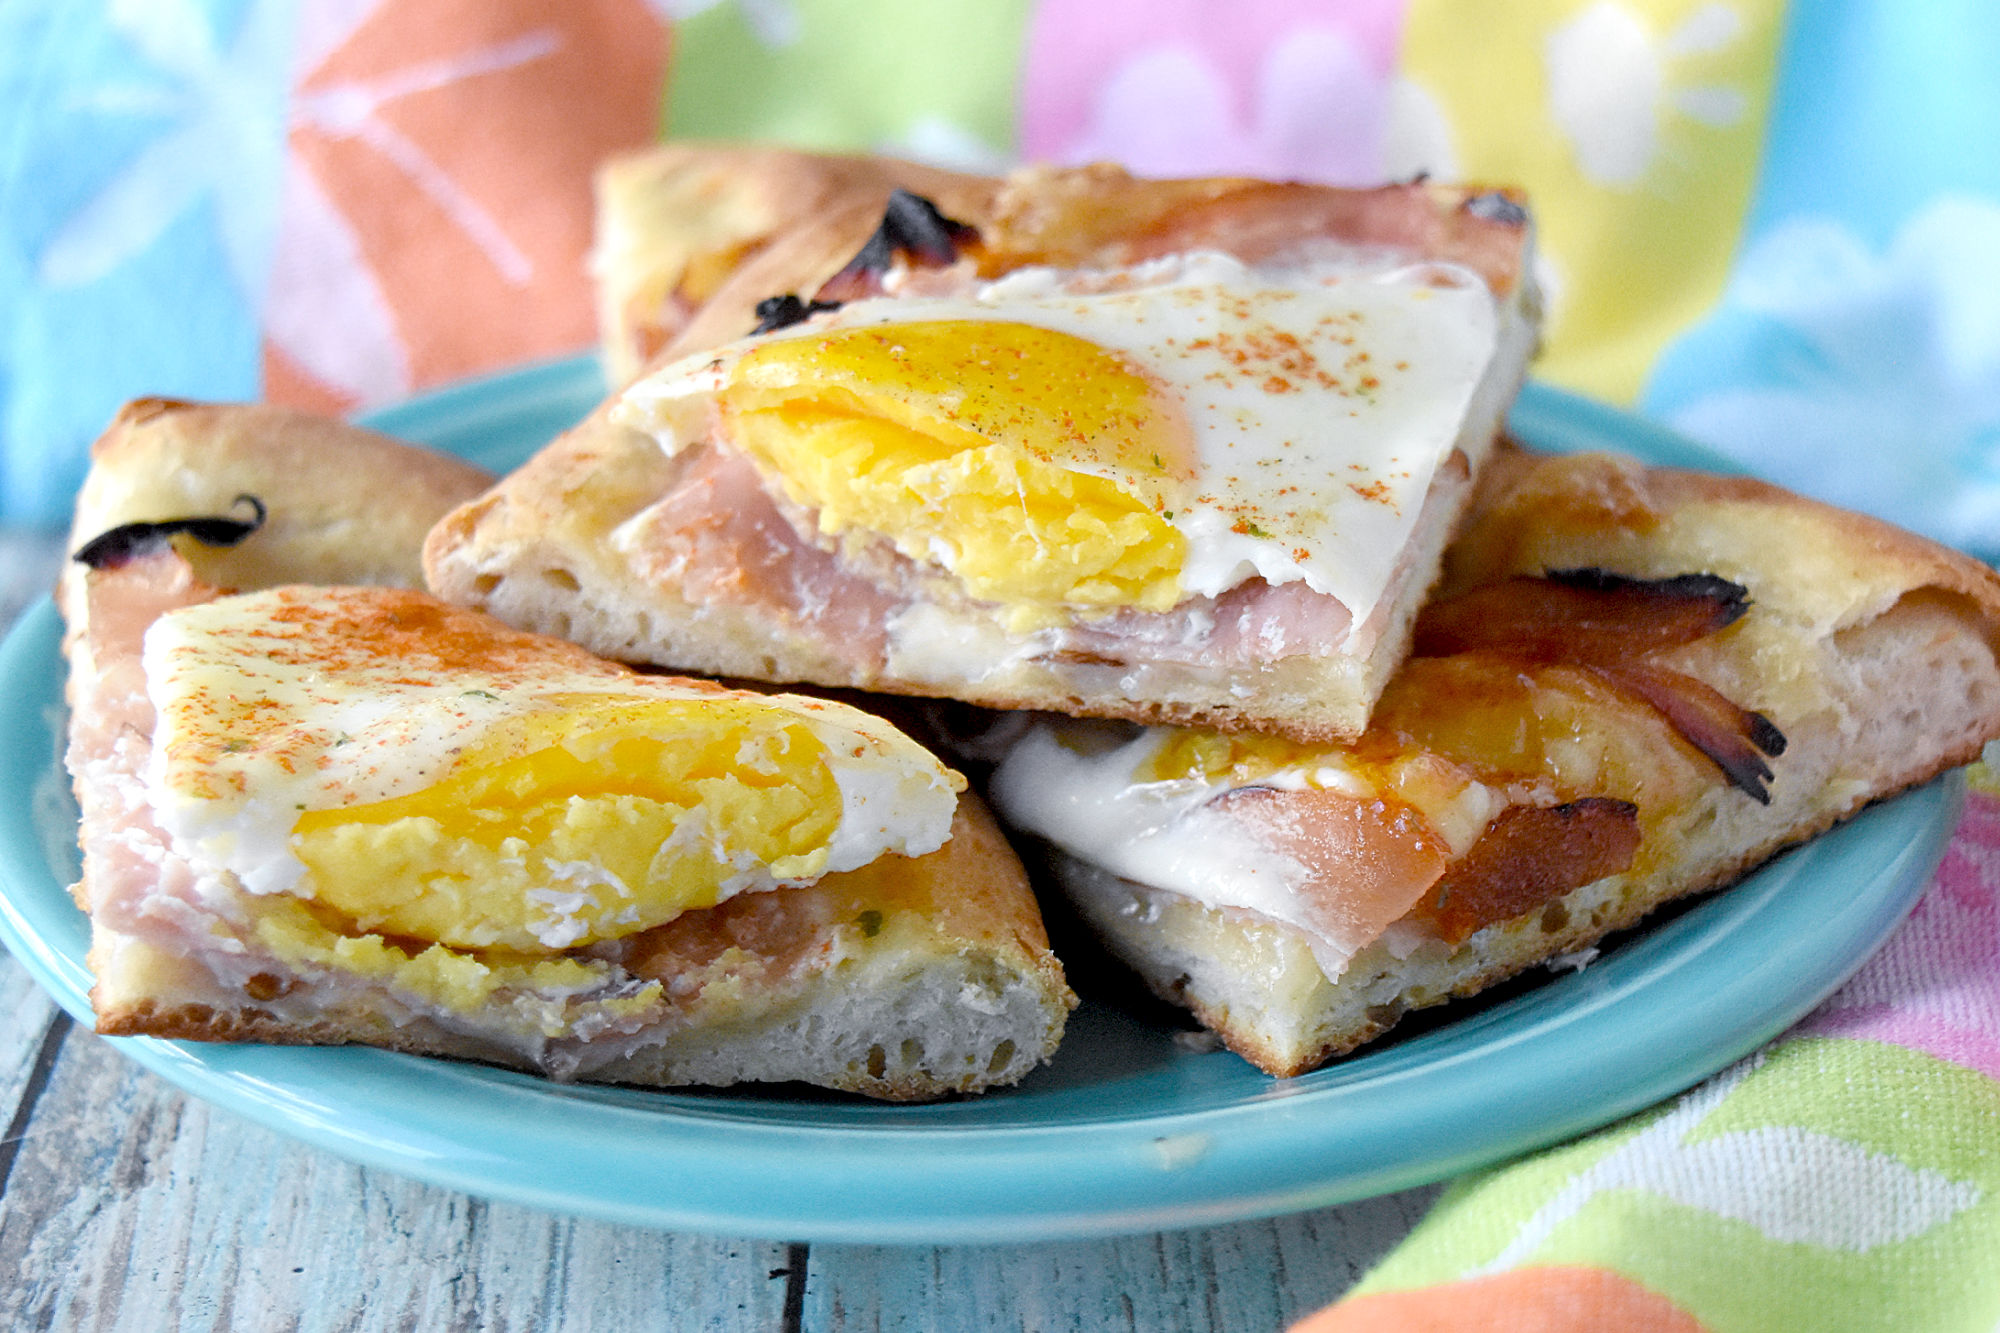 Individual Breakfast Pizzas are easy to prep and even easier to let your guests create and bake their own! Make breakfast pizza bar and let them have fun making their own breakfast pizza.